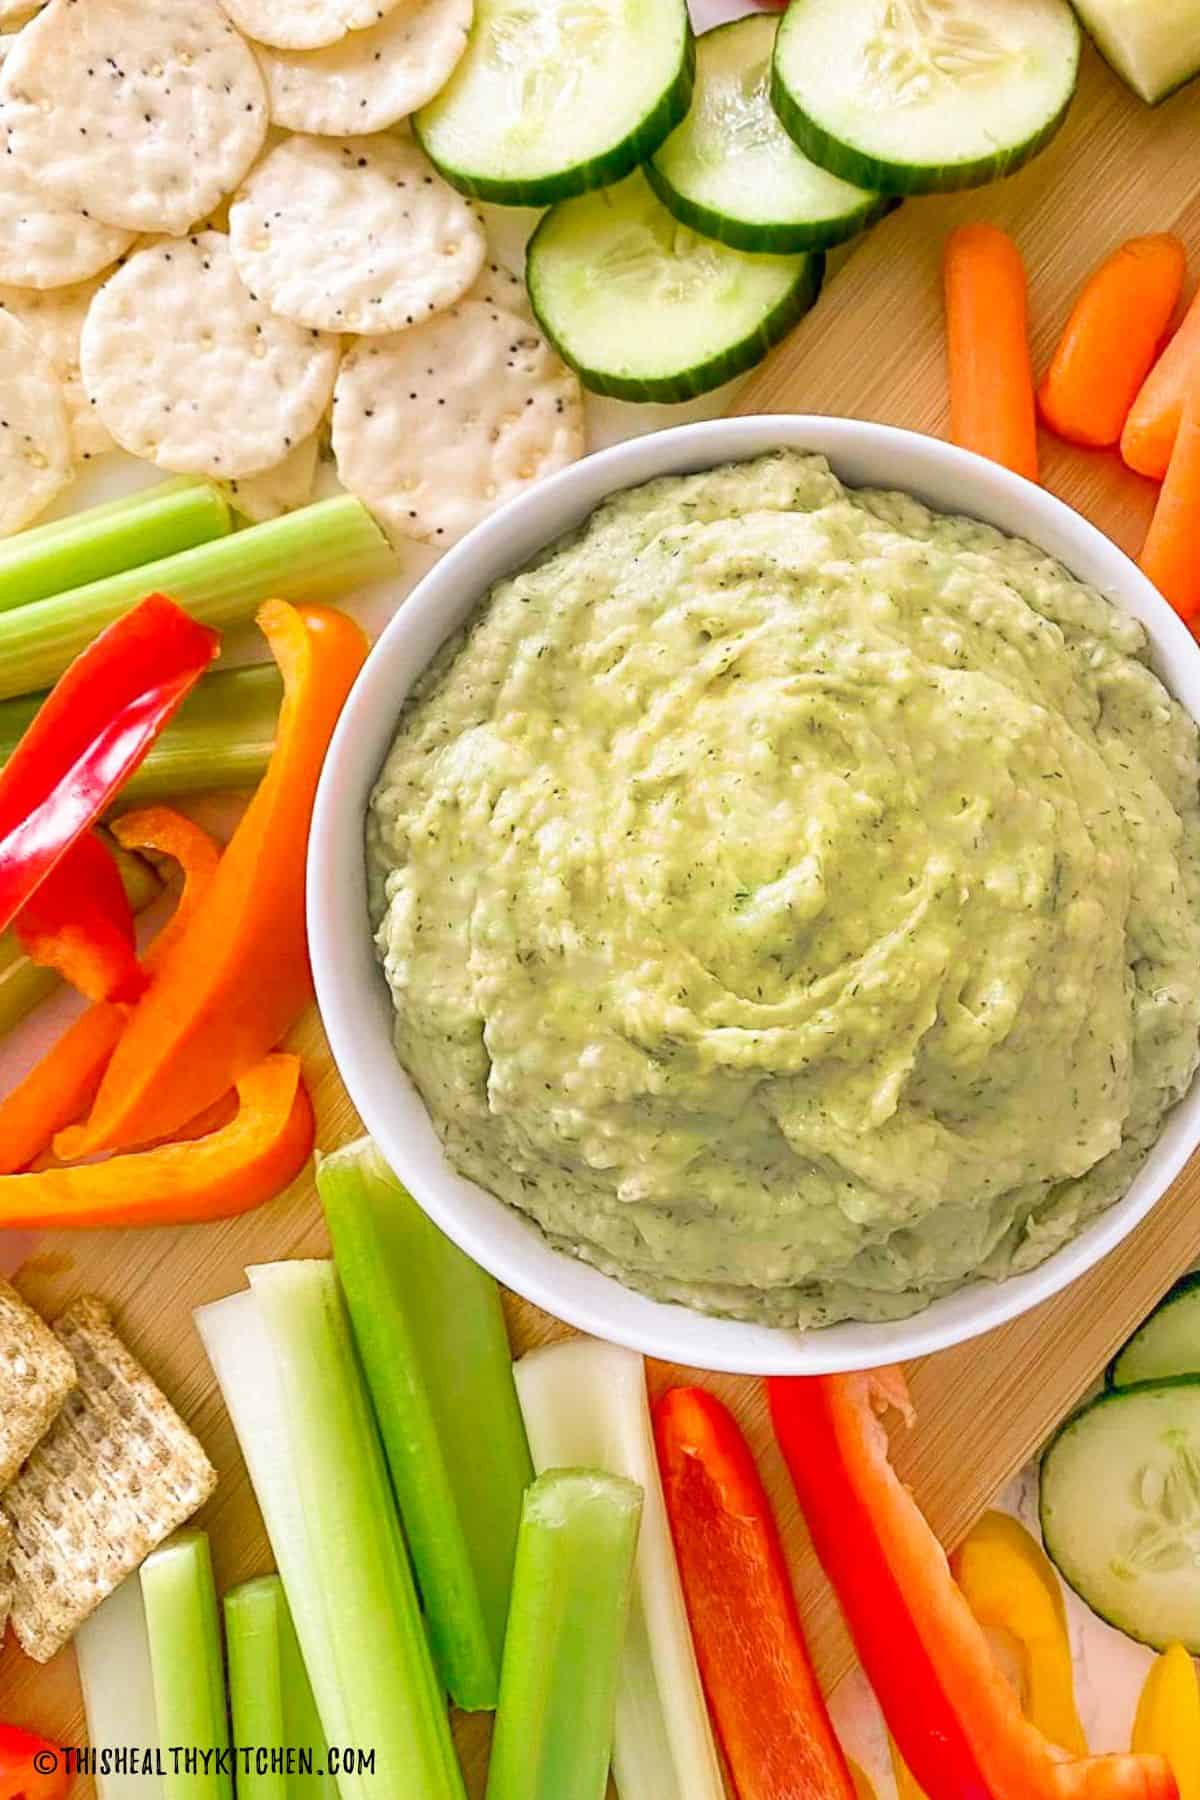 Bowl of green dip with veggies and crackers surrounding it.